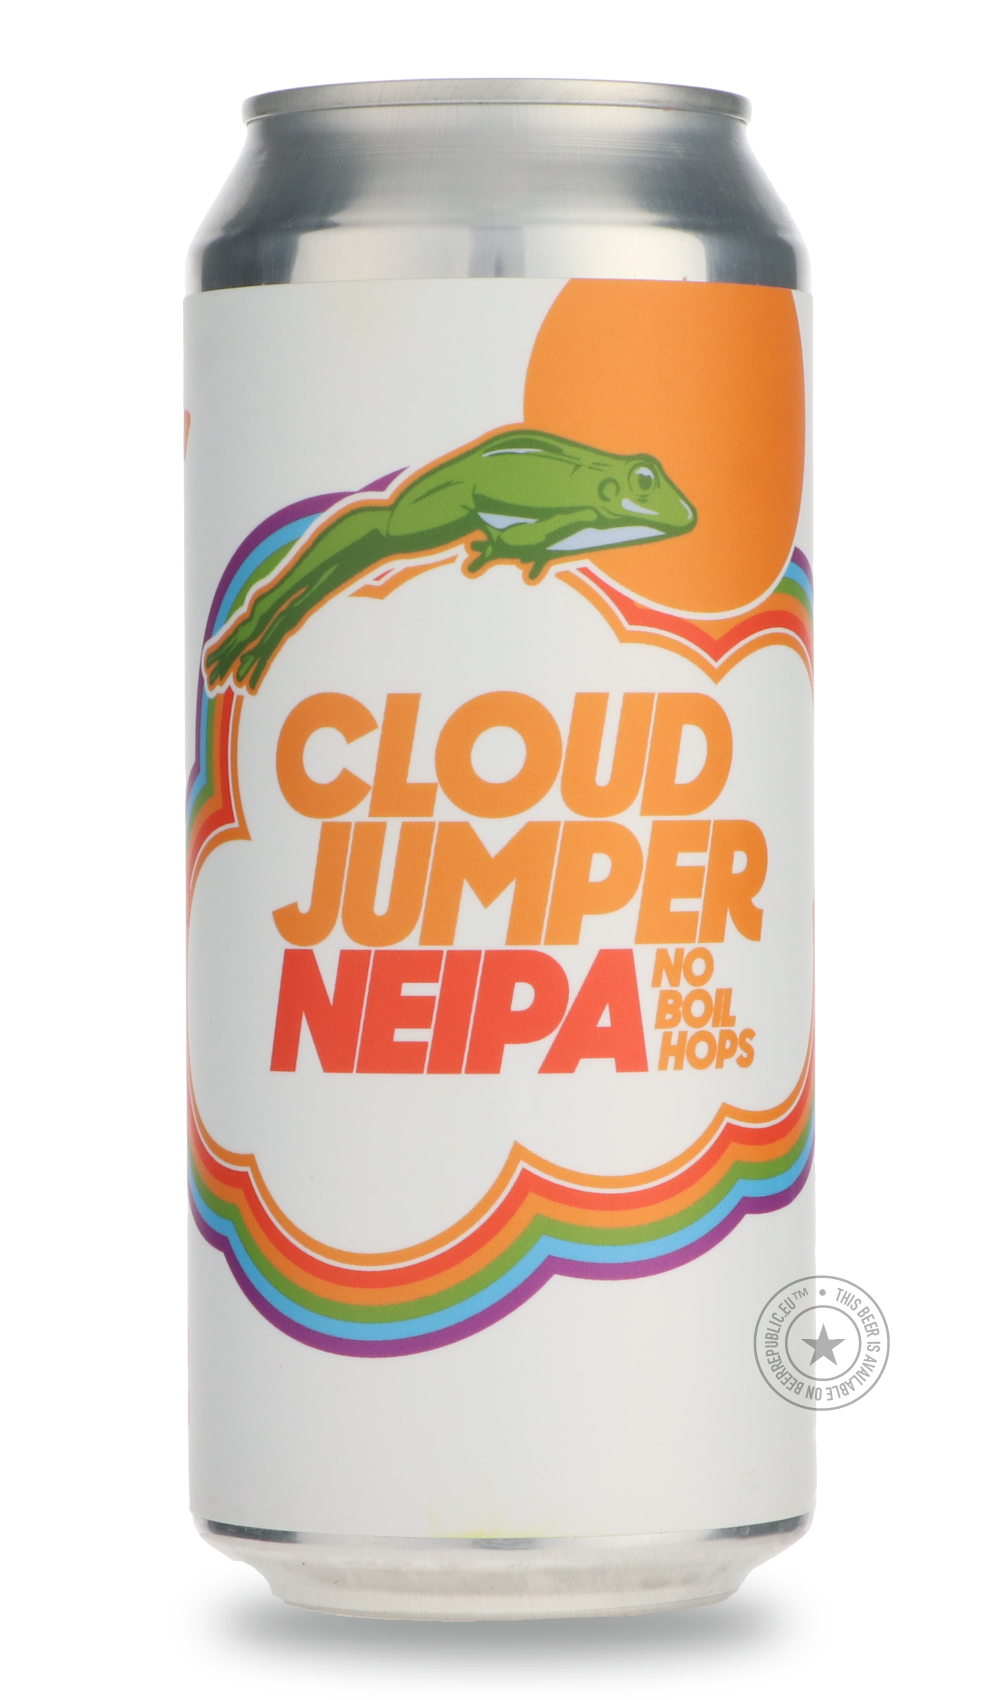 -Sloop- Cloud Jumper-IPA- Only @ Beer Republic - The best online beer store for American & Canadian craft beer - Buy beer online from the USA and Canada - Bier online kopen - Amerikaans bier kopen - Craft beer store - Craft beer kopen - Amerikanisch bier kaufen - Bier online kaufen - Acheter biere online - IPA - Stout - Porter - New England IPA - Hazy IPA - Imperial Stout - Barrel Aged - Barrel Aged Imperial Stout - Brown - Dark beer - Blond - Blonde - Pilsner - Lager - Wheat - Weizen - Amber - Barley Wine 